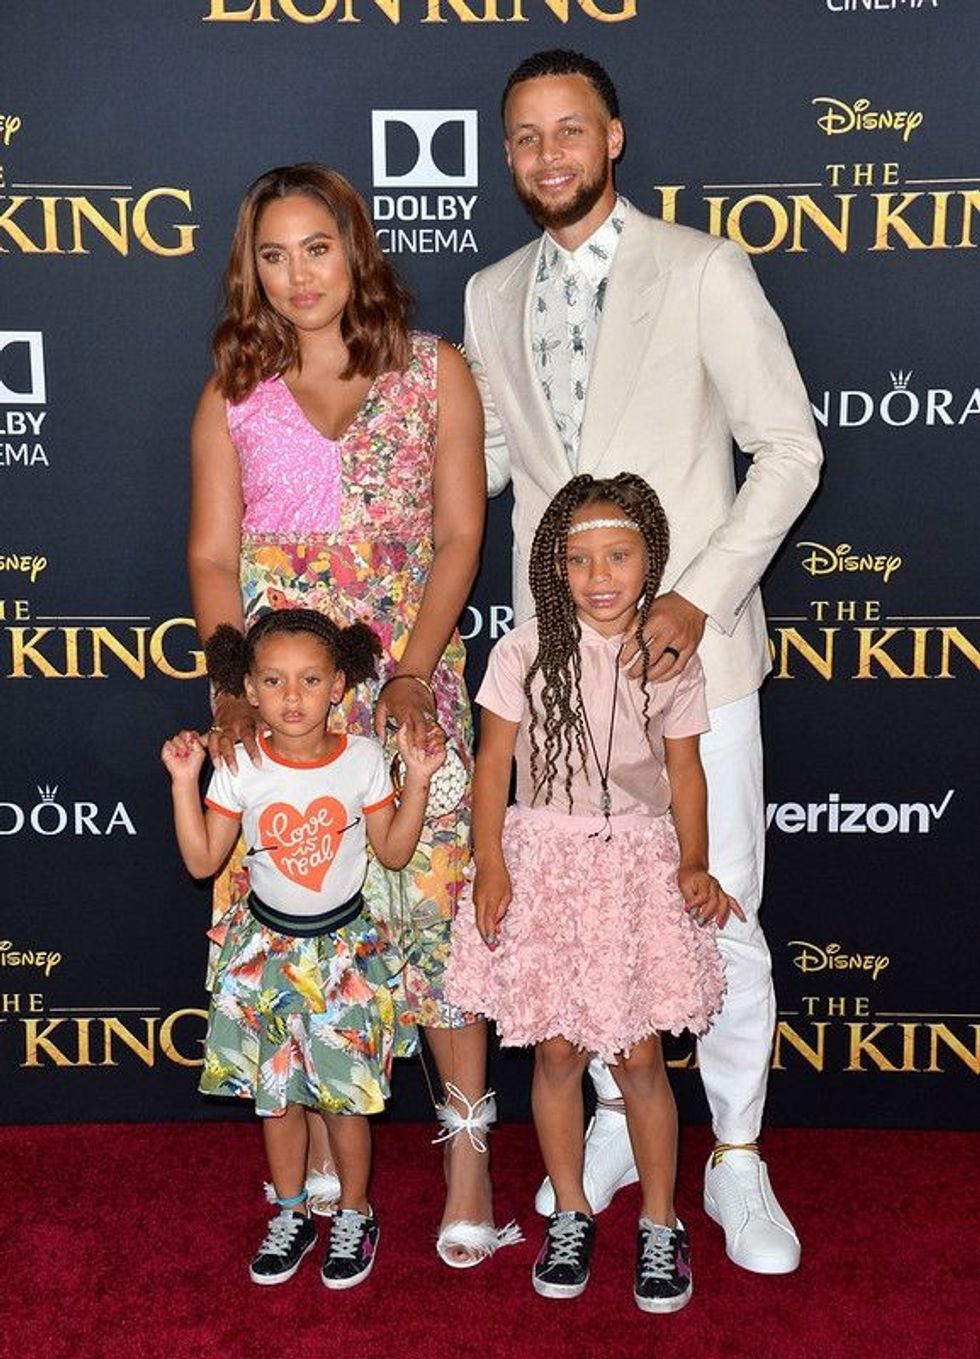 Steph Curry with his family at an event